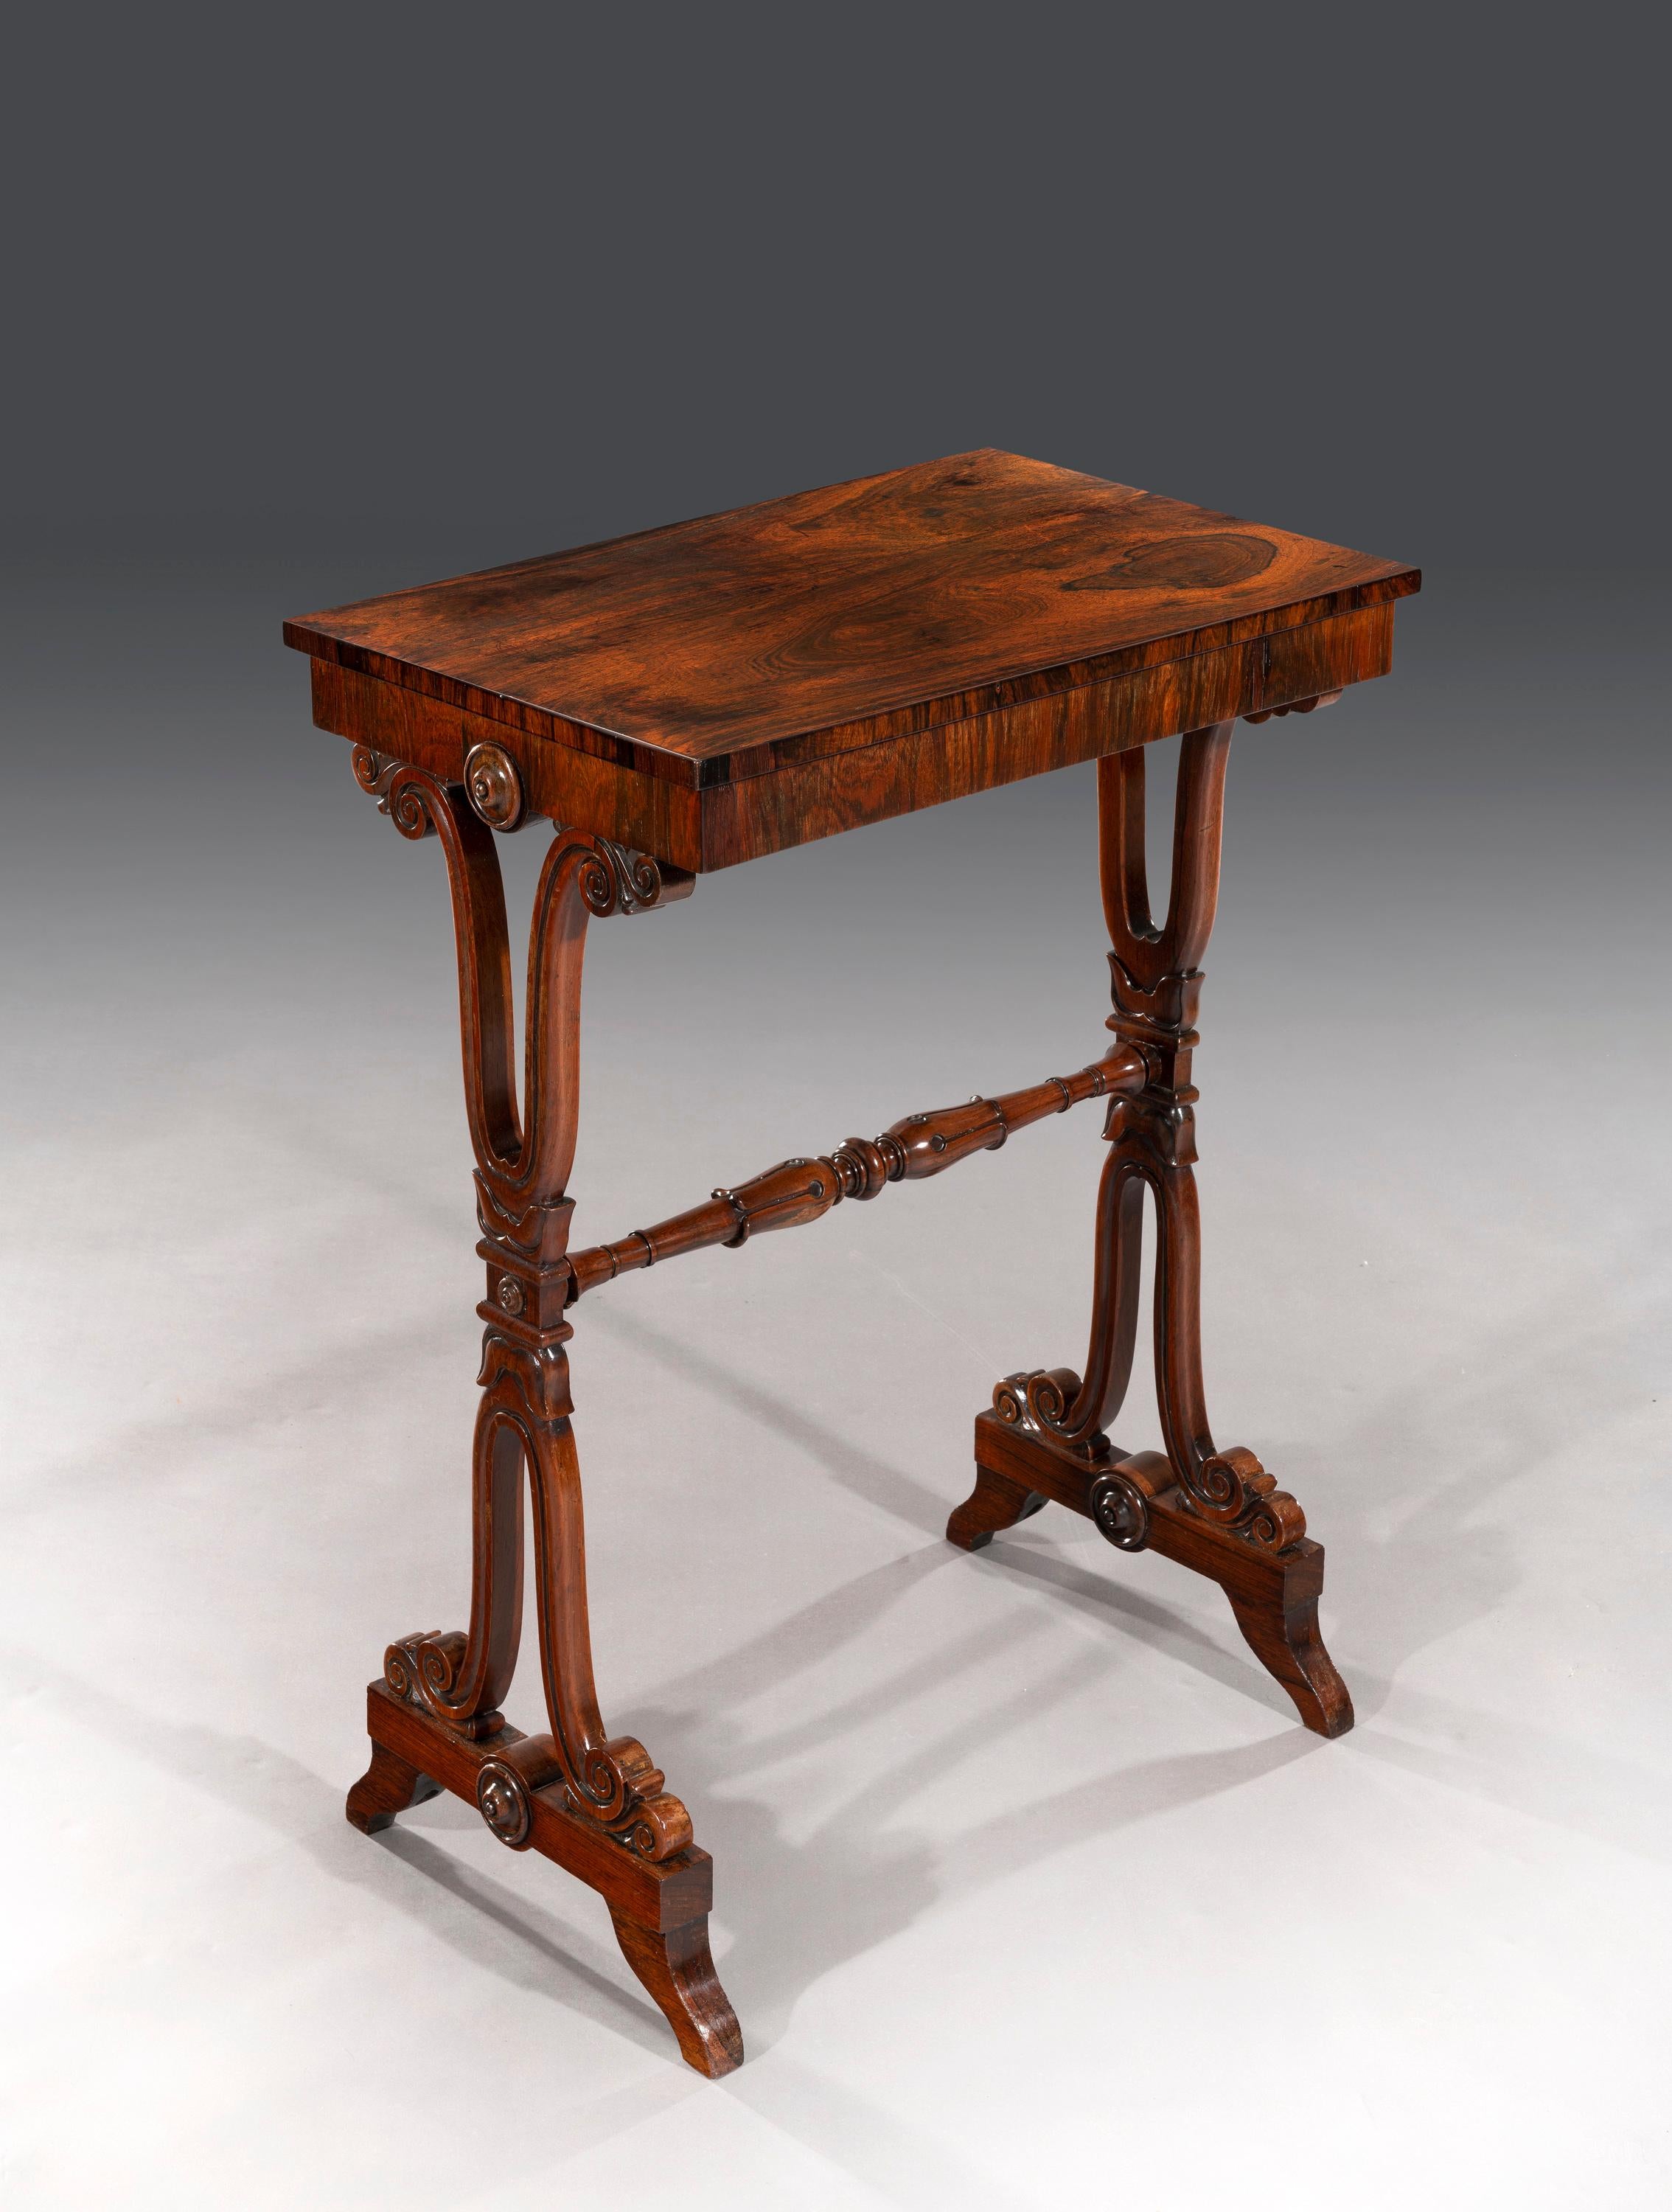 A fine diminutive rectangular figured walnut side table with highly decorative carved end supports that stand on plinths and shaped toes. 


George Smith's 